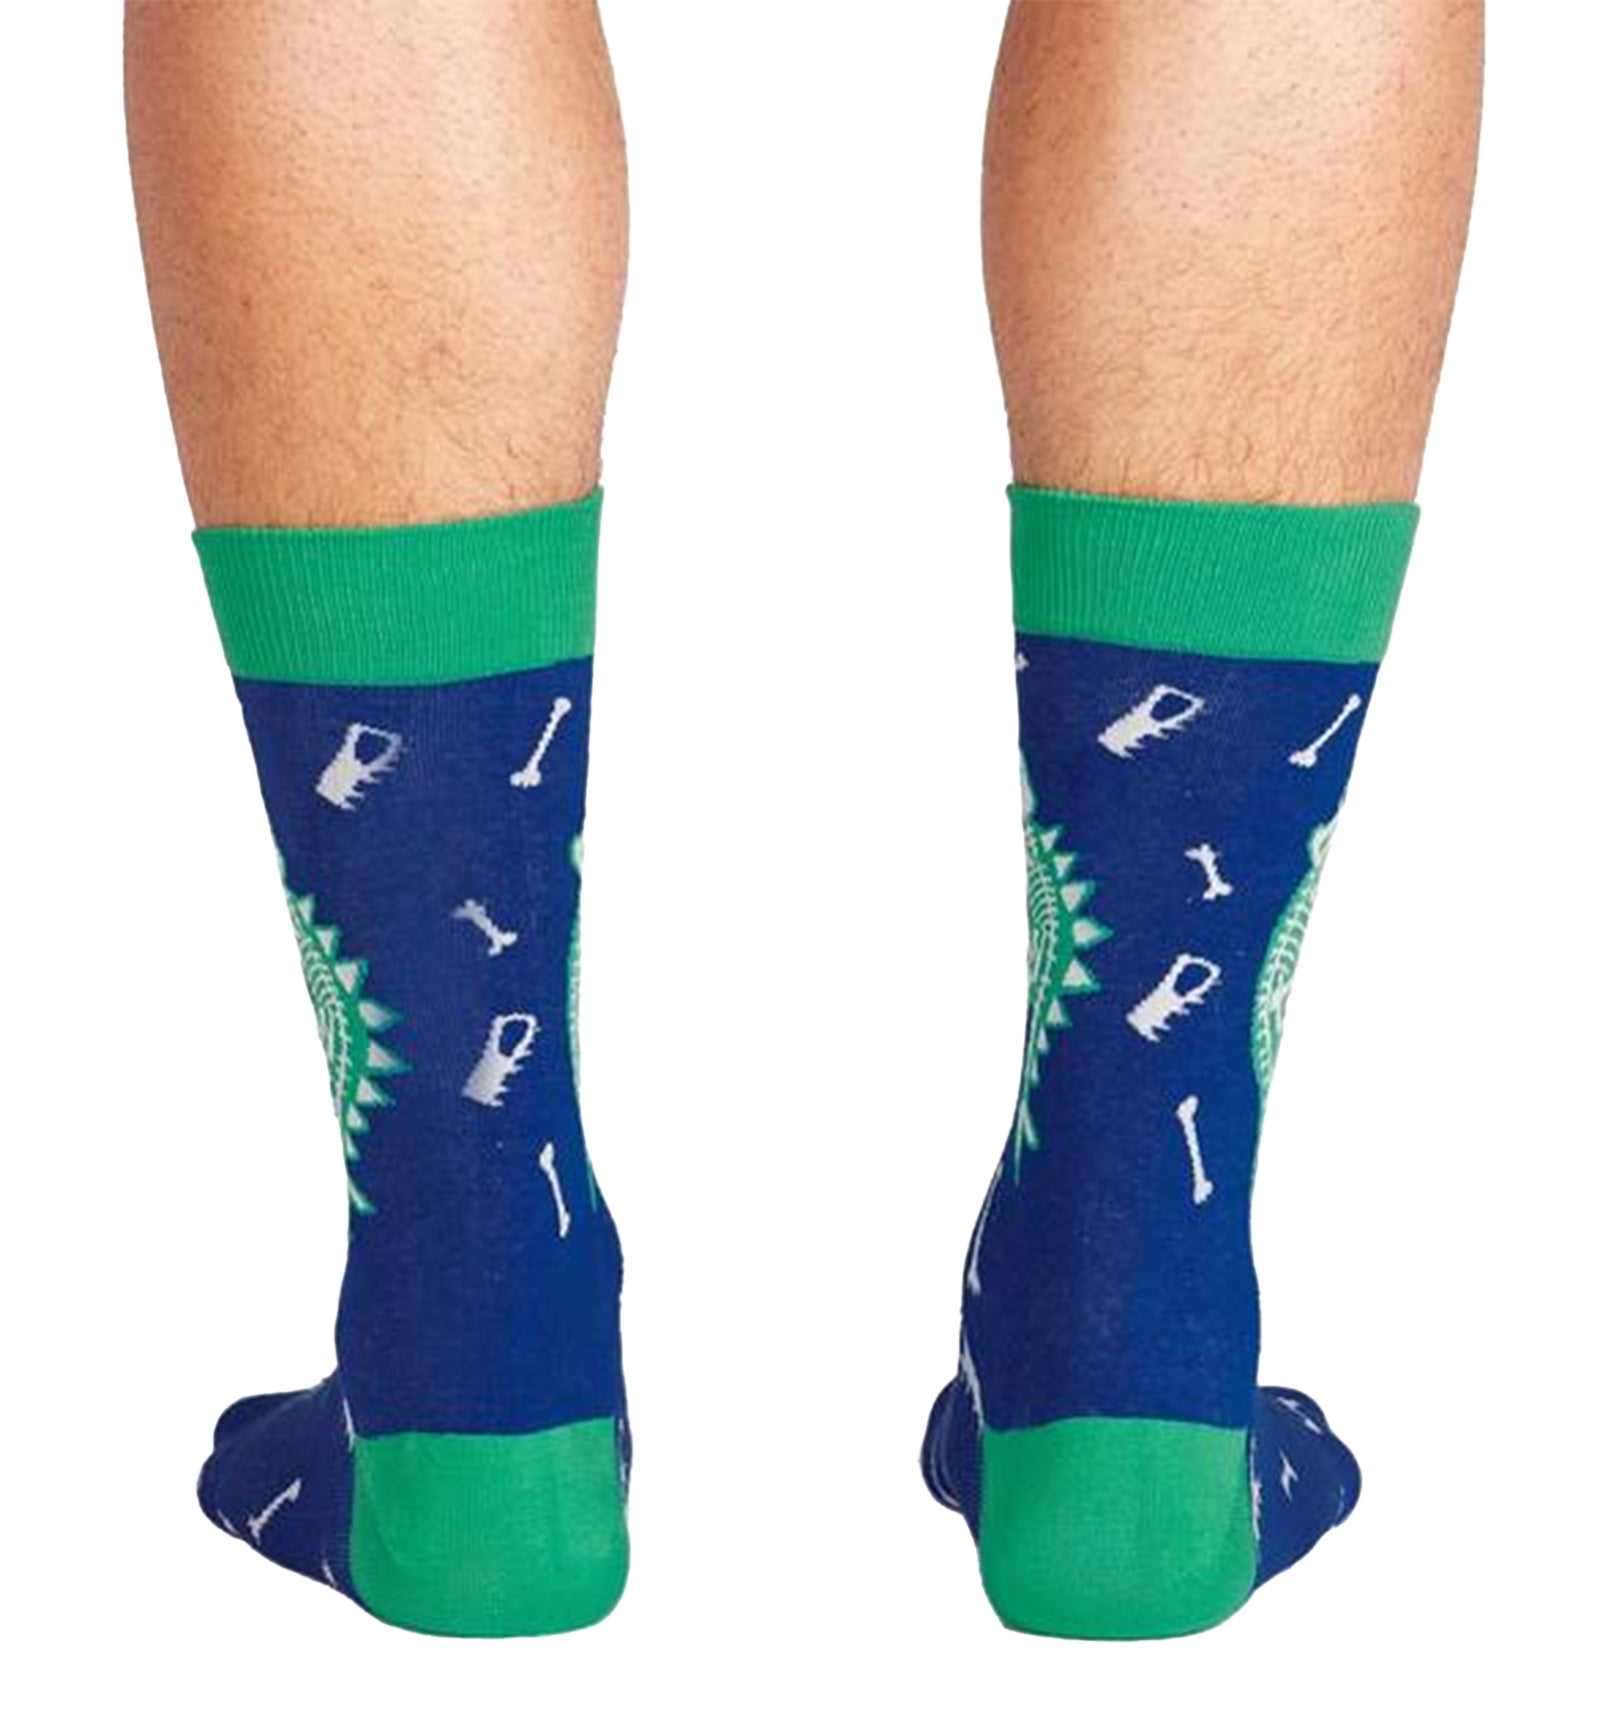 SOCK it to me Men's Crew Socks (mef0335),Arch-eology - Arch-eology,One Size